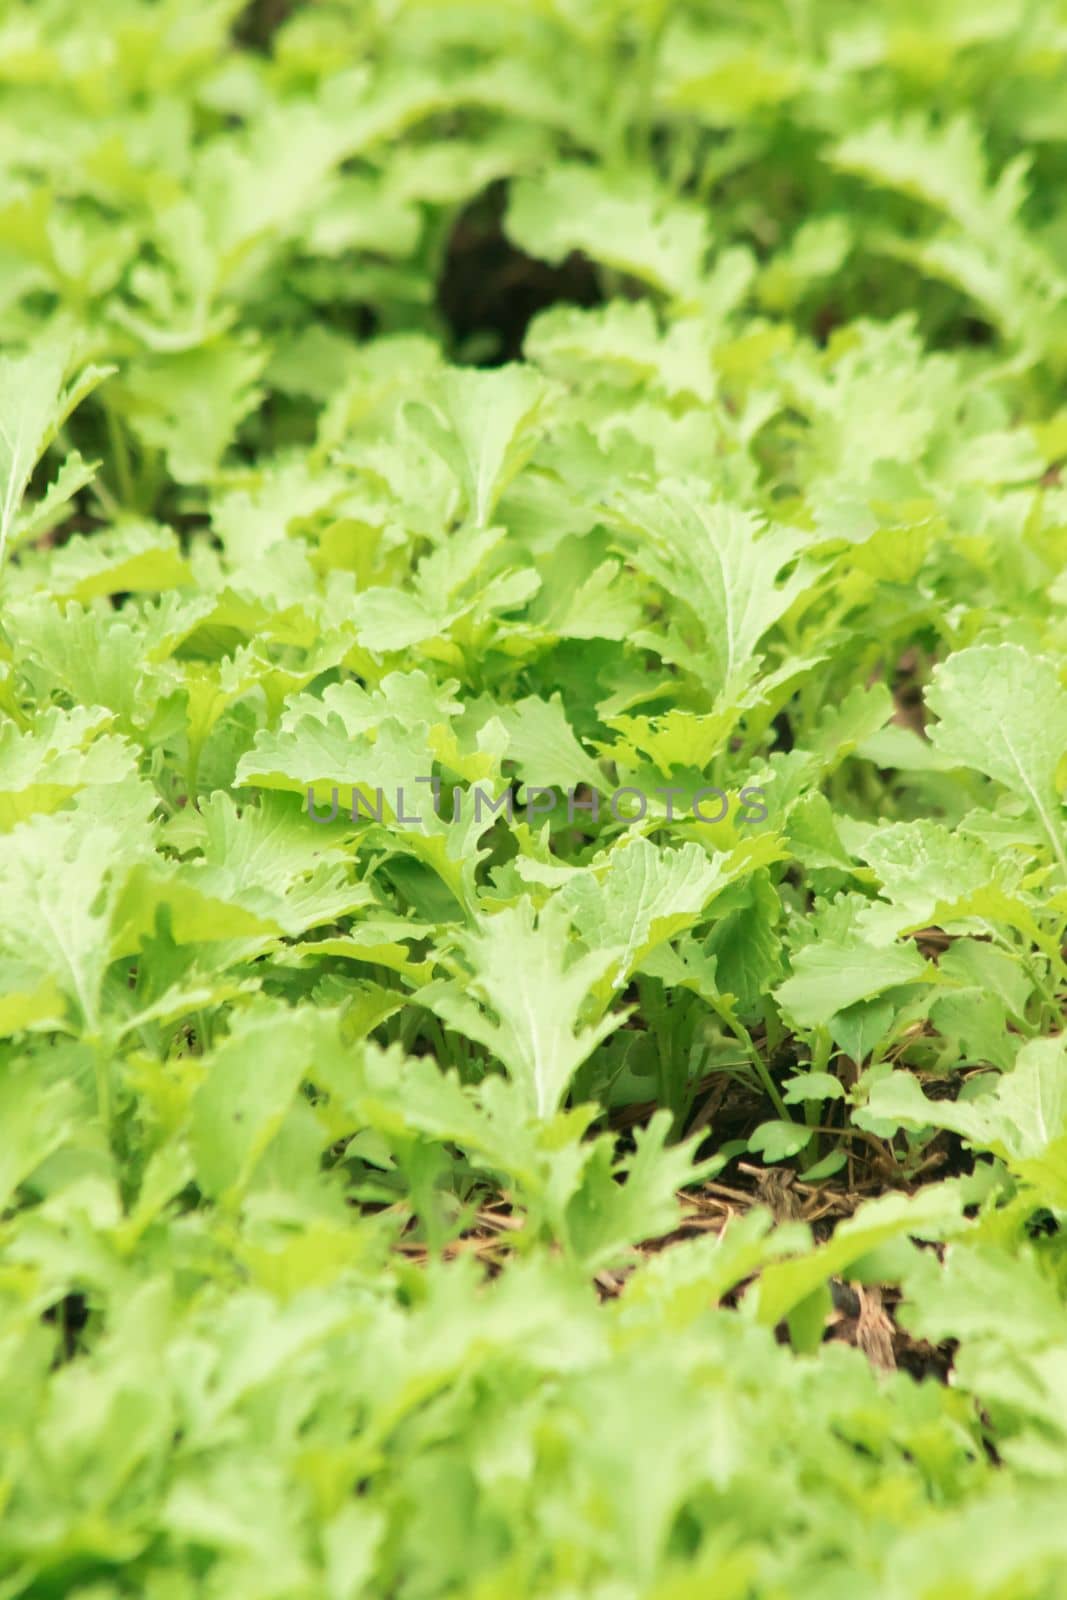 Mustard Green on the soil plot that has a curly, wrinkled leaf surface
Eat it fresh, it will have a strong pungent smell. Similar to eating wasabi
